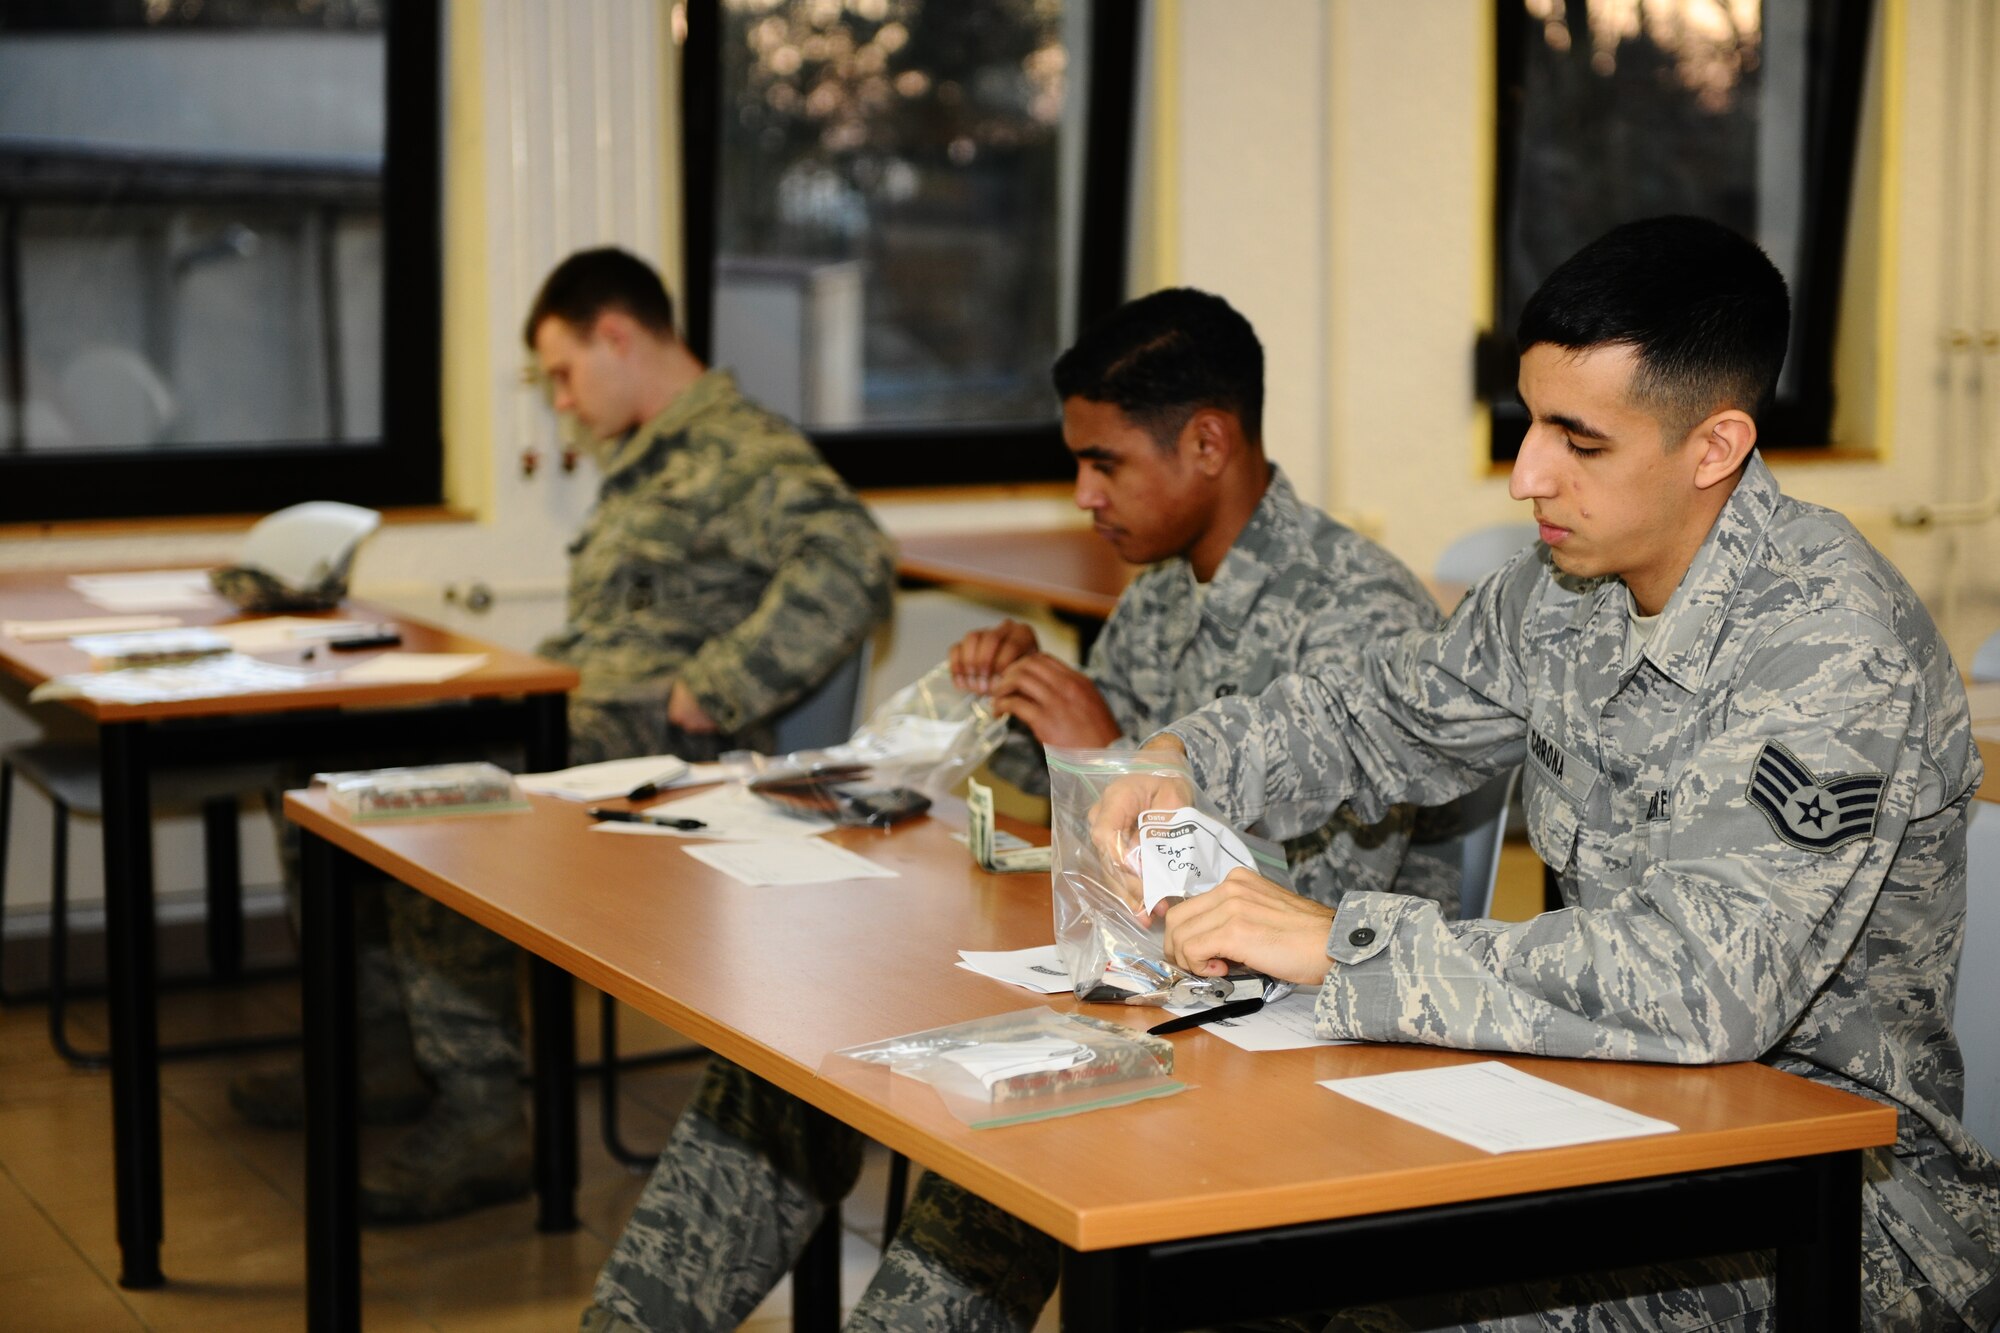 SPANGDAHLEM AIR BASE, Germany – Staff Sgt. Edgar Corona, right, 52nd Medical Operations Squadron; Airman 1st Class Vicente Mattocks, center, 606th Air Control Squadron; and Senior Airman Sean Reval, 52nd Security Forces Squadron, place their valuables in ziplock bags for safe keeping before the Ranger training course began inside Bldg. 603 here March 1. The required three-day course prepares Airmen for what they will be tested on during the U.S. Army Ranger pre-assessment training course. The pre-assessment course tests service members physically and mentally with challenges ranging from ruck marching to battle survival tactics. Out of the five Airmen enrolled in the training, Senior Airman Sean Reval, 52nd Security Forces Squadron, and Senior Airman Coty Raphael, 52nd Medical Operations Squadron, were the only participants to qualify to continue on to Ranger pre-assessment training at Sembach Air Base, Germany. (U.S. Air Force photo by Airman 1st Class Dillon Davis/Released)